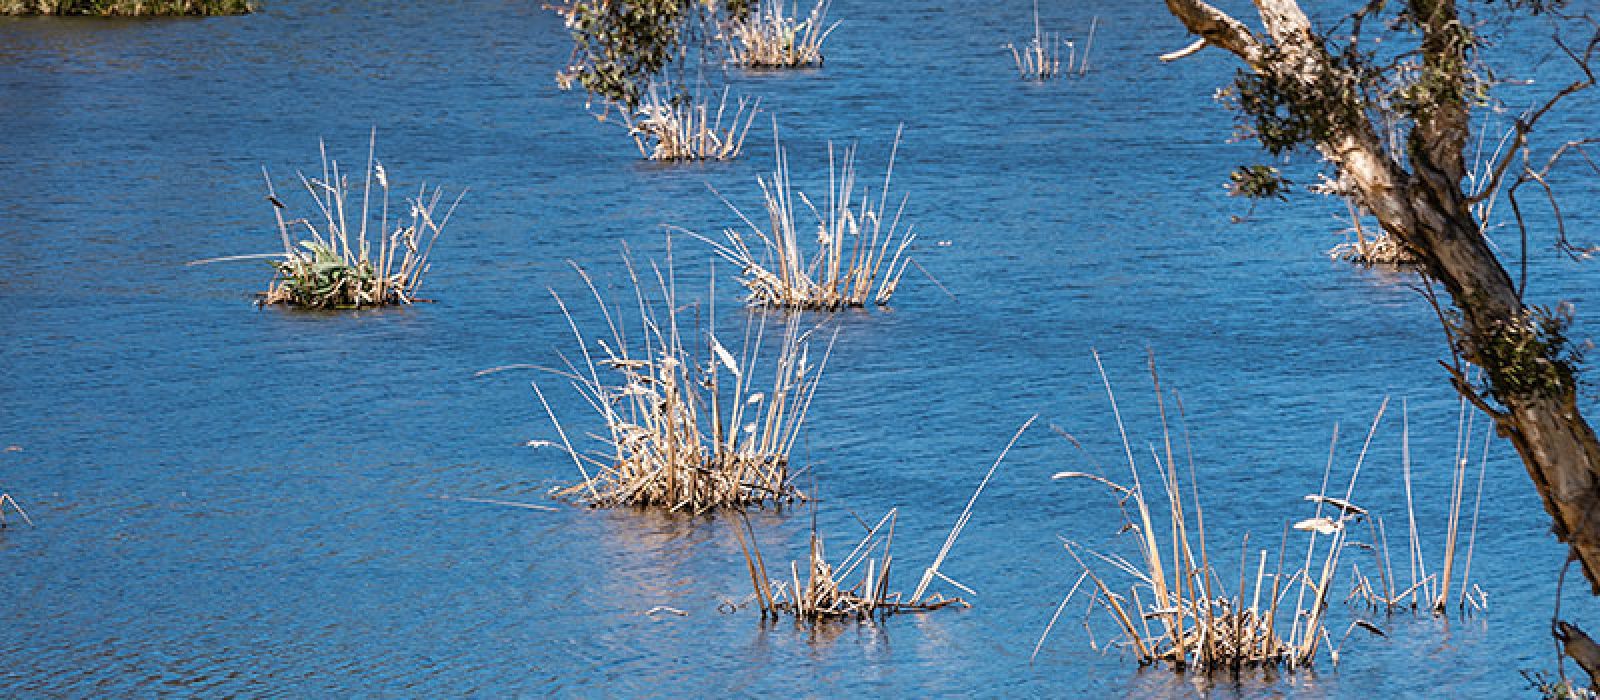 Image of tussock grass growing in water banner image